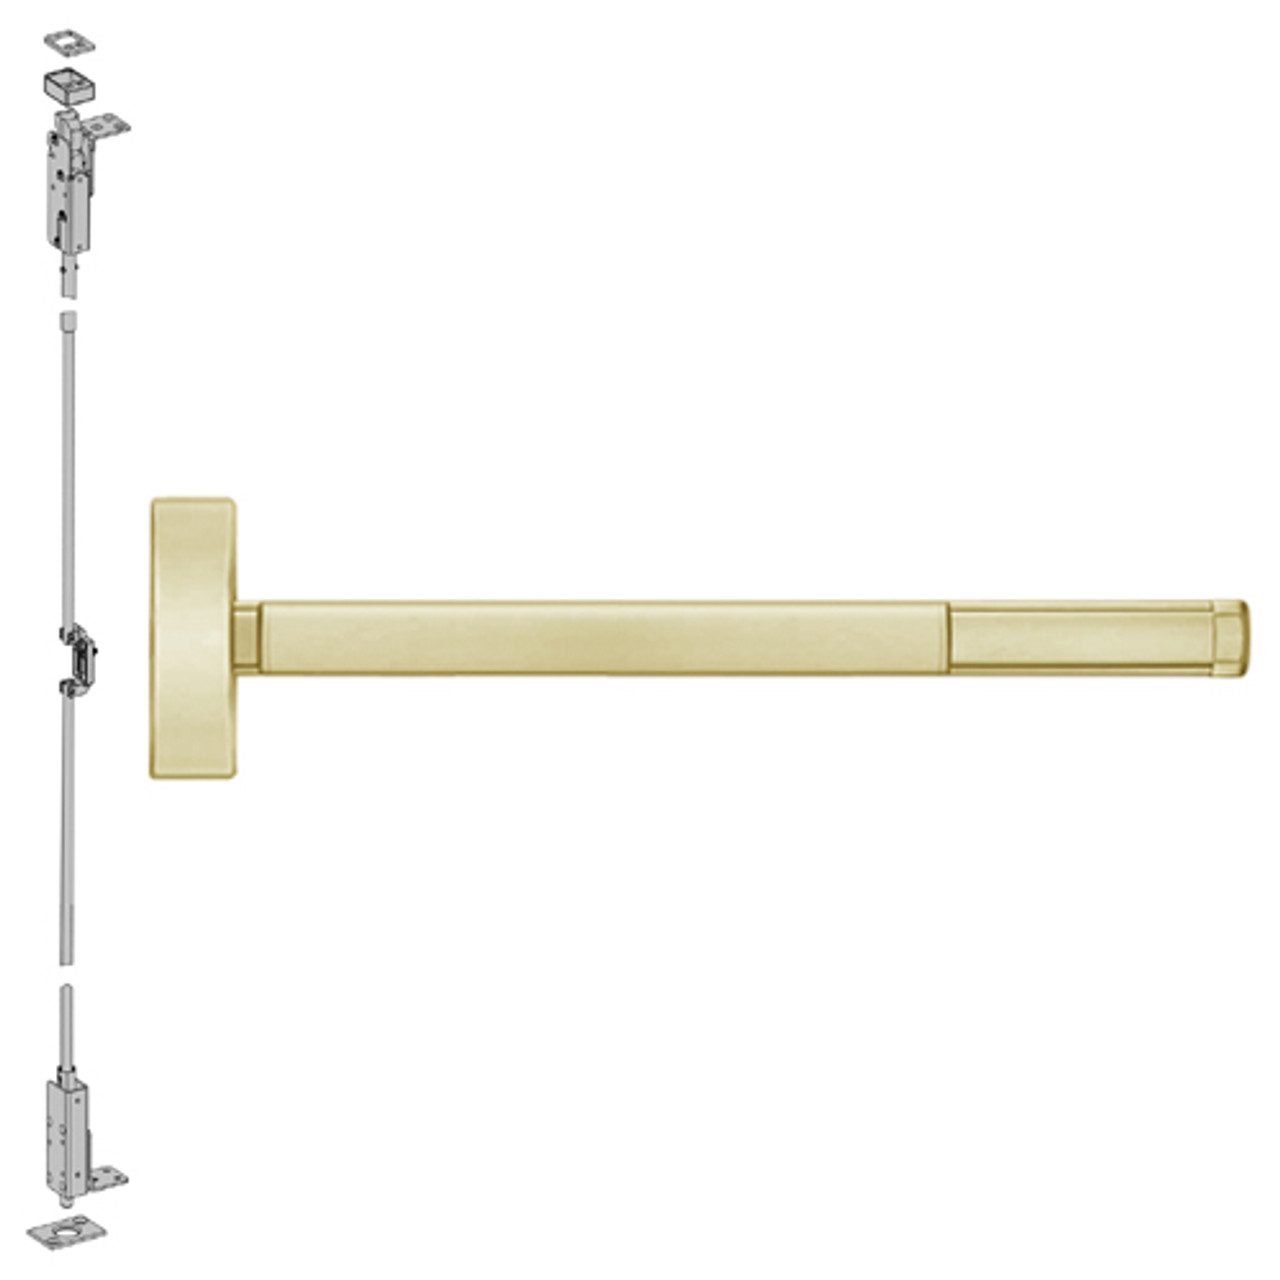 TS2703-606-48 PHI 2700 Series Wood Door Concealed Vertical Exit Device with Touchbar Monitoring Switch Prepped for Key Retracts Latchbolt in Satin Brass Finish